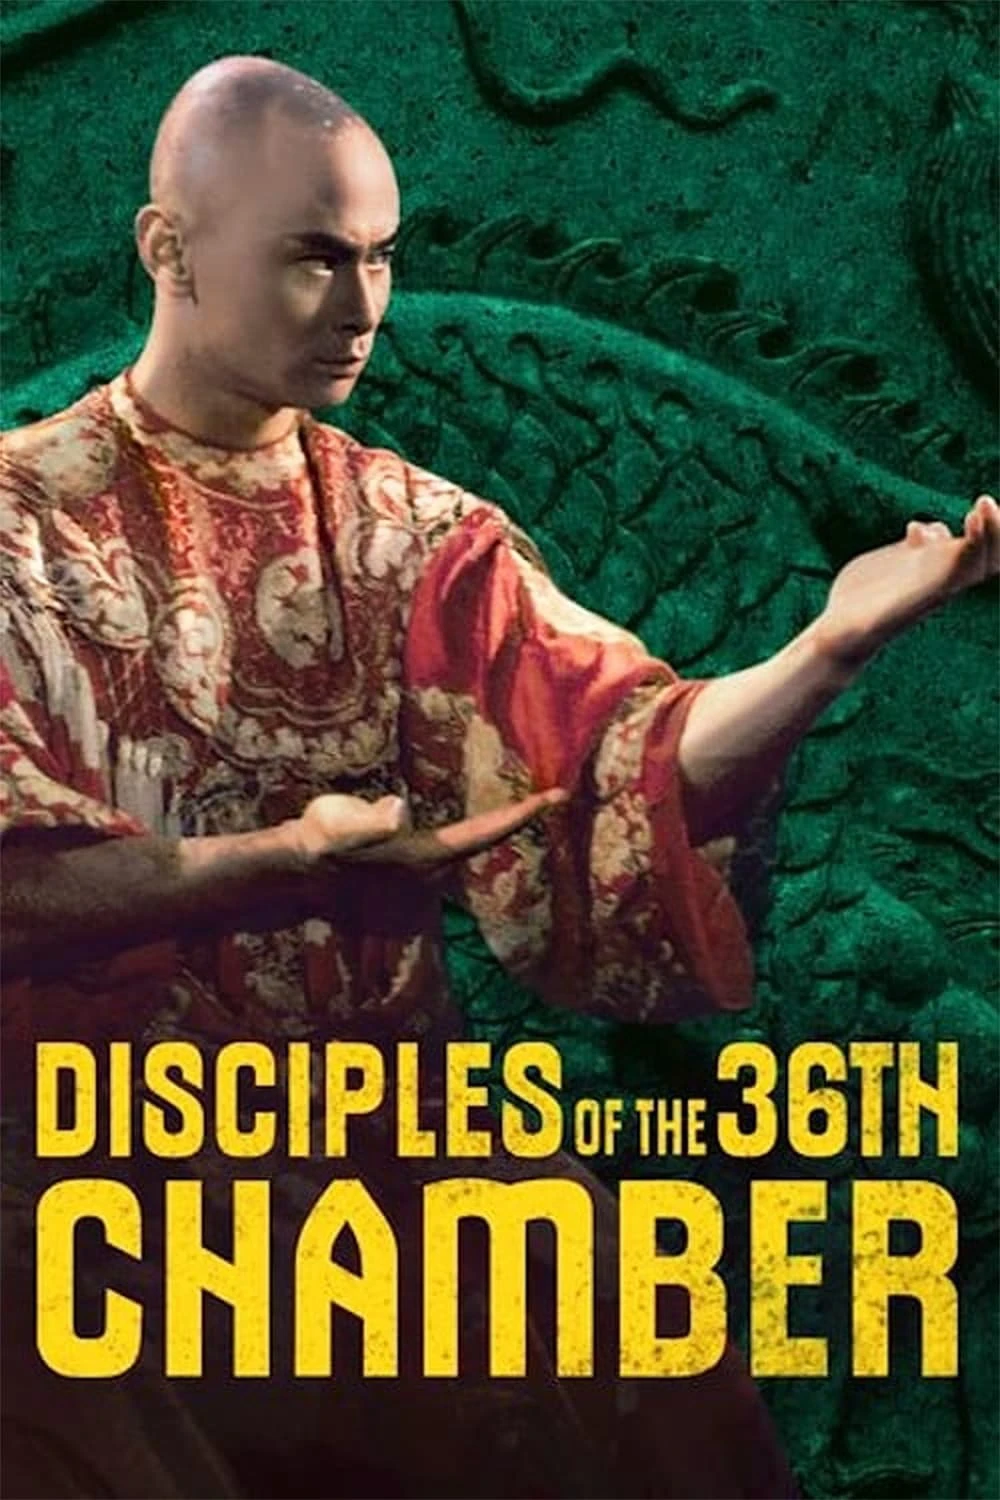 Disciples of the 36th Chamber | 霹靂十傑 (1985)